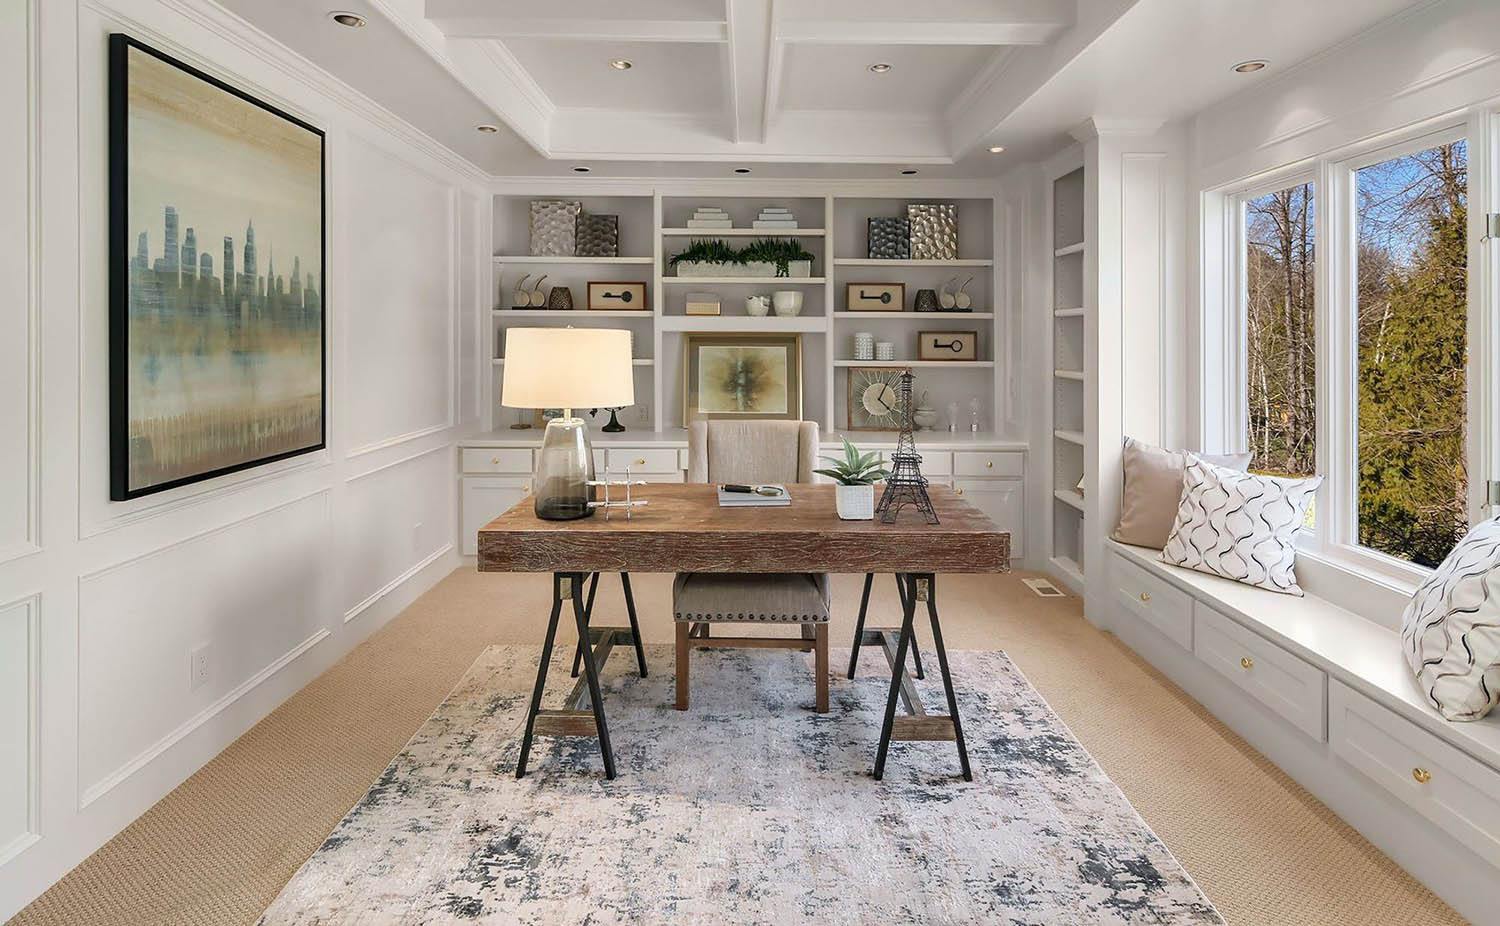 Home office coffered ceiling with soffits. All white ceiling and walls with white trim and wall paneling. Wood desk with metal black legs. Built ins and window seat.